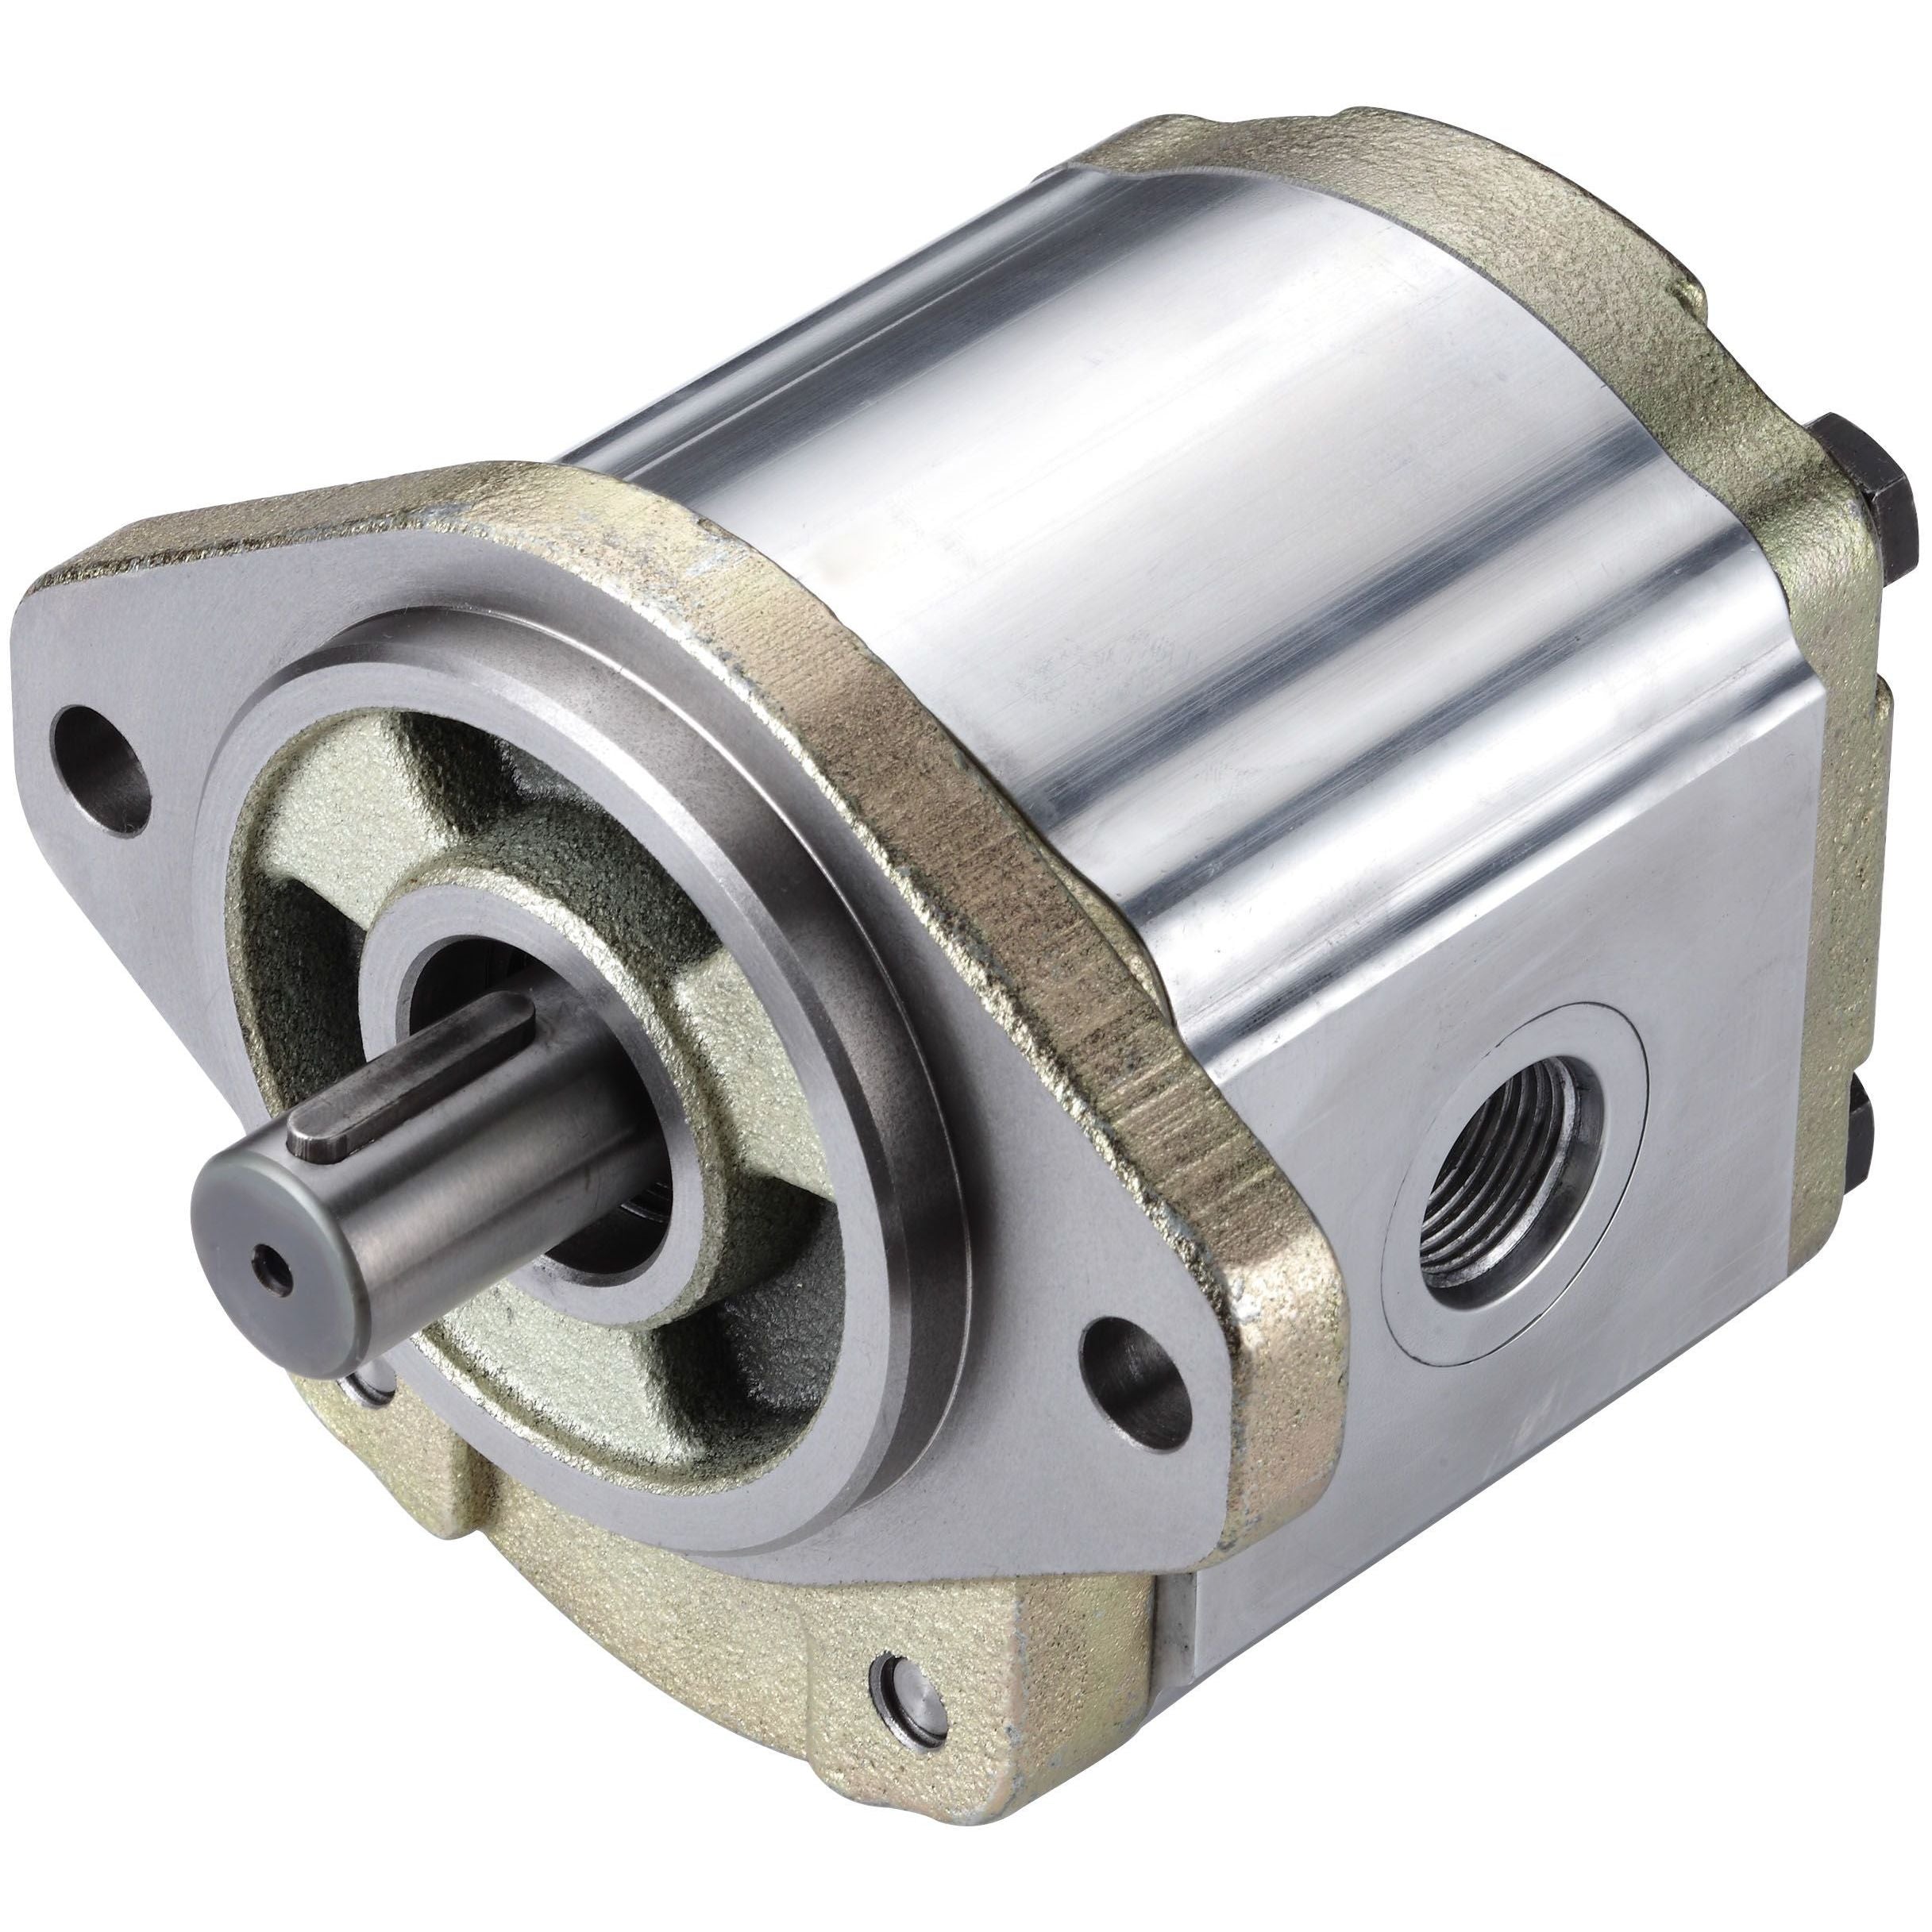 3GB8ZU290L : Honor Gear Pump, CCW Rotation, 90cc (5.49in3), 42.8 GPM, 2000psi, 2000 RPM, #20 SAE (1.25") In, #12 SAE (3/4") Out, Splined Shaft 13-Tooth, 16/32 Pitch, SAE B 2-Bolt Mount